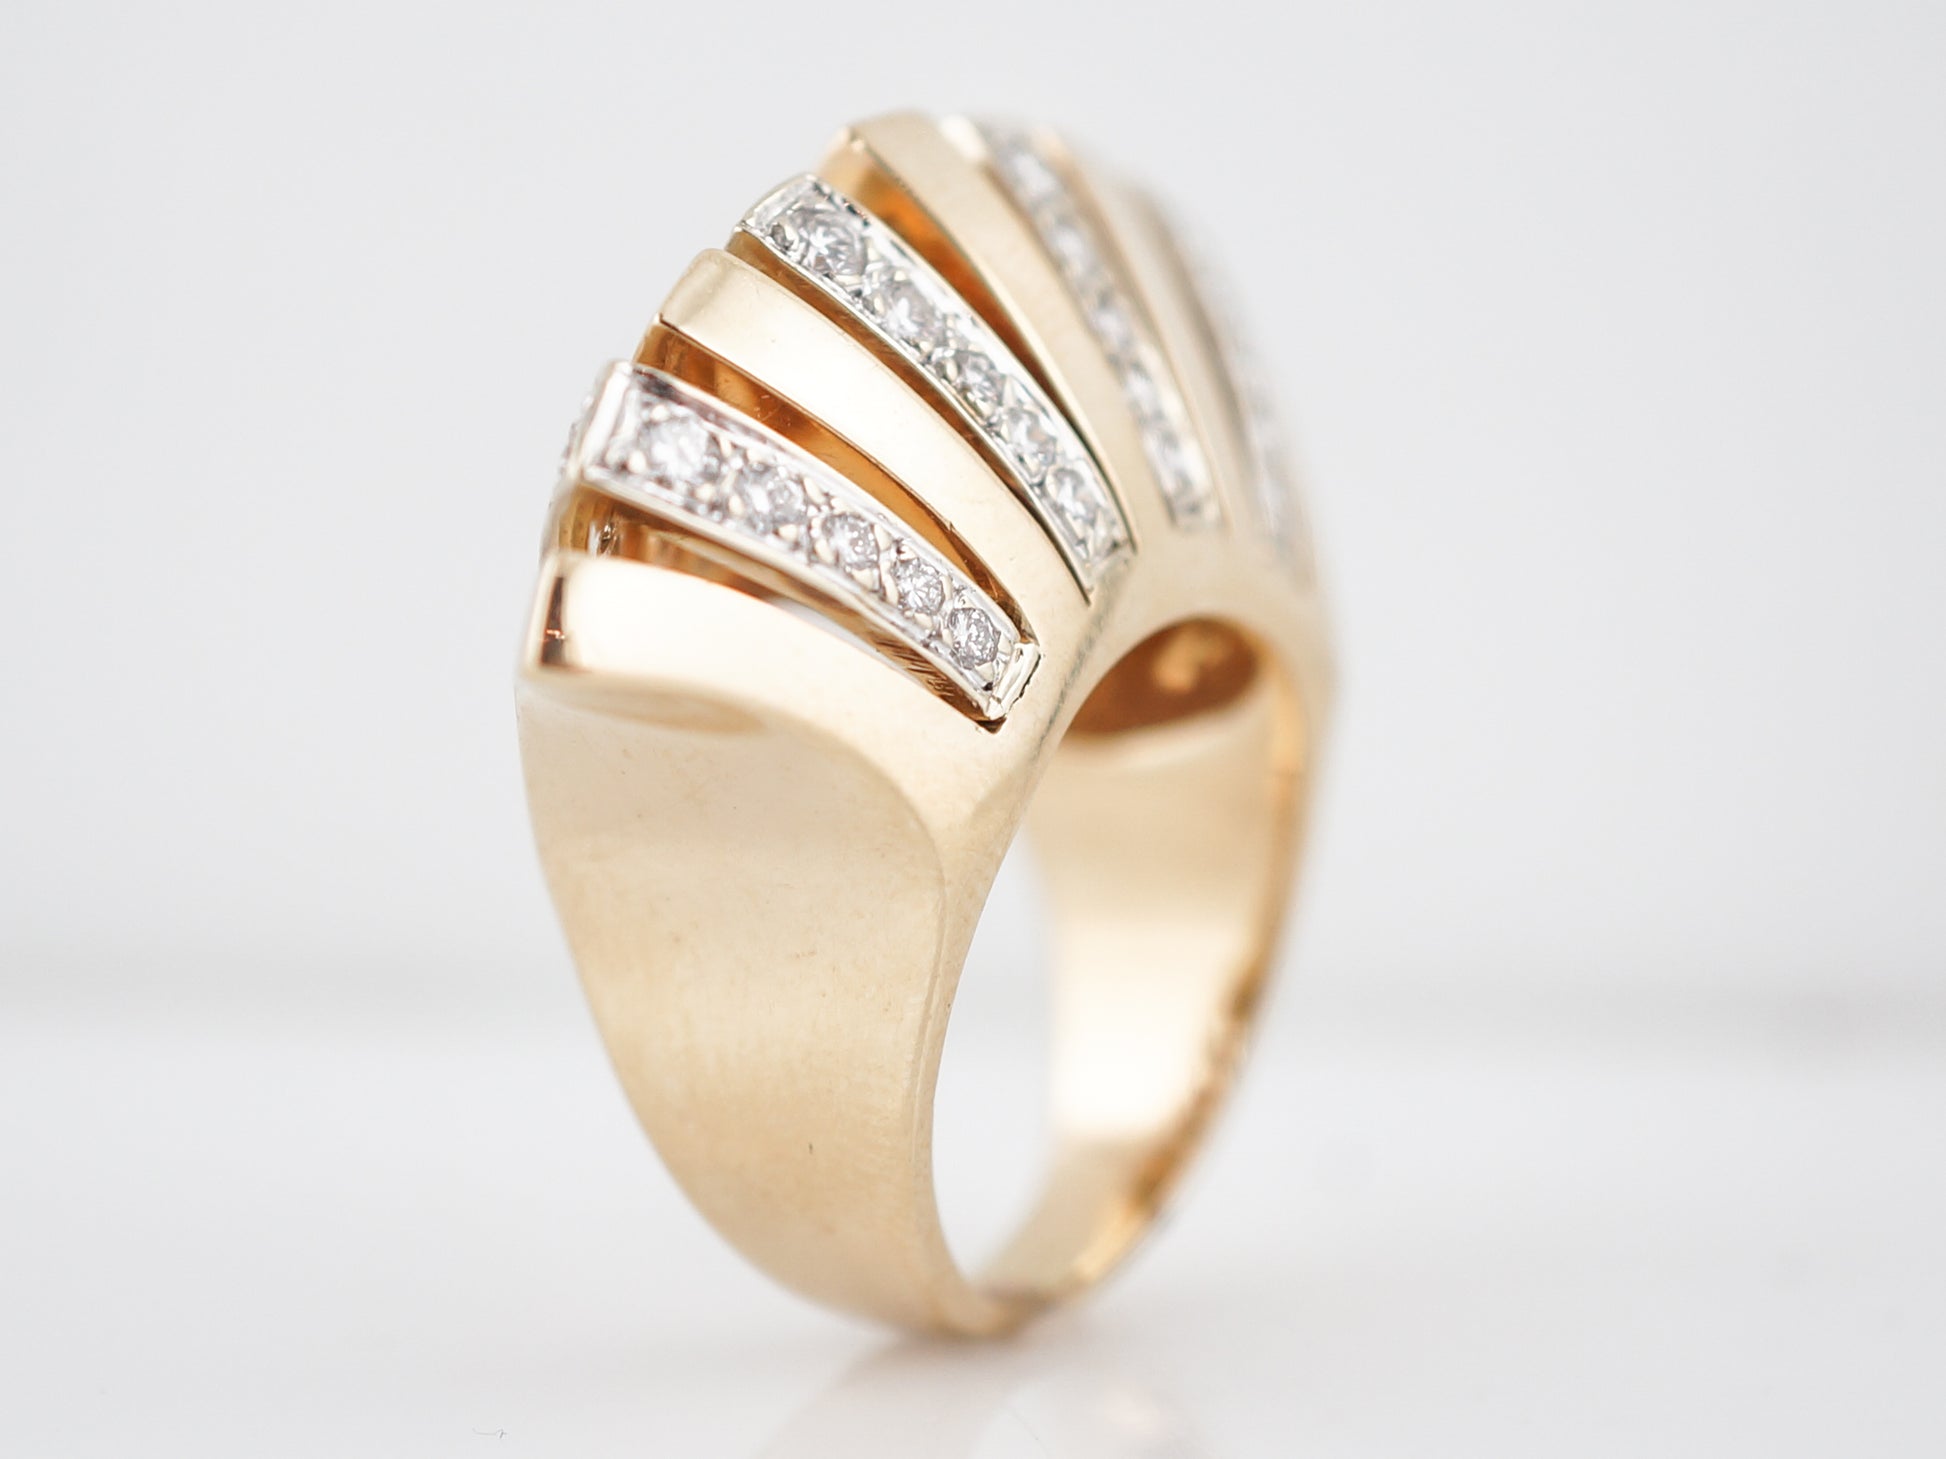 Vintage Right Hand Ring Mid-Century .80 Round Brilliant Cut Diamonds in 14k Yellow Gold